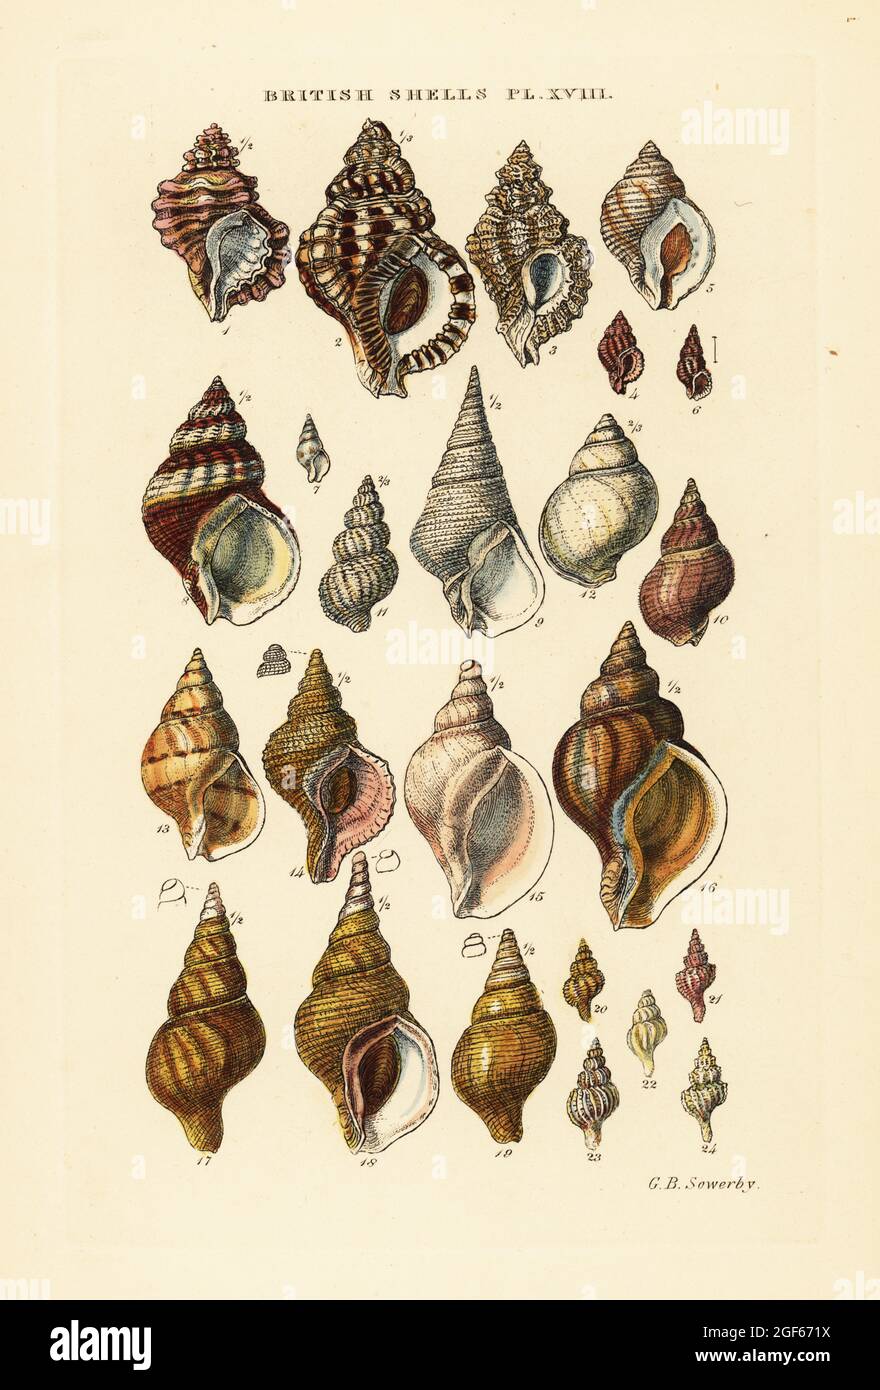 Triton shells, Ranella, rock snails, Murex, whelk, Bucchinum, Furus, Trophon, etc. Handcoloured copperplate engraving by George Brettingham Sowerby from his own Illustrated Index of British Shells, Sowerby and Simpkin, Marshall & Co., London, 1859. George Brettingham Sowerby II (1812-1884), British naturalist, illustrator, and conchologist. Stock Photo